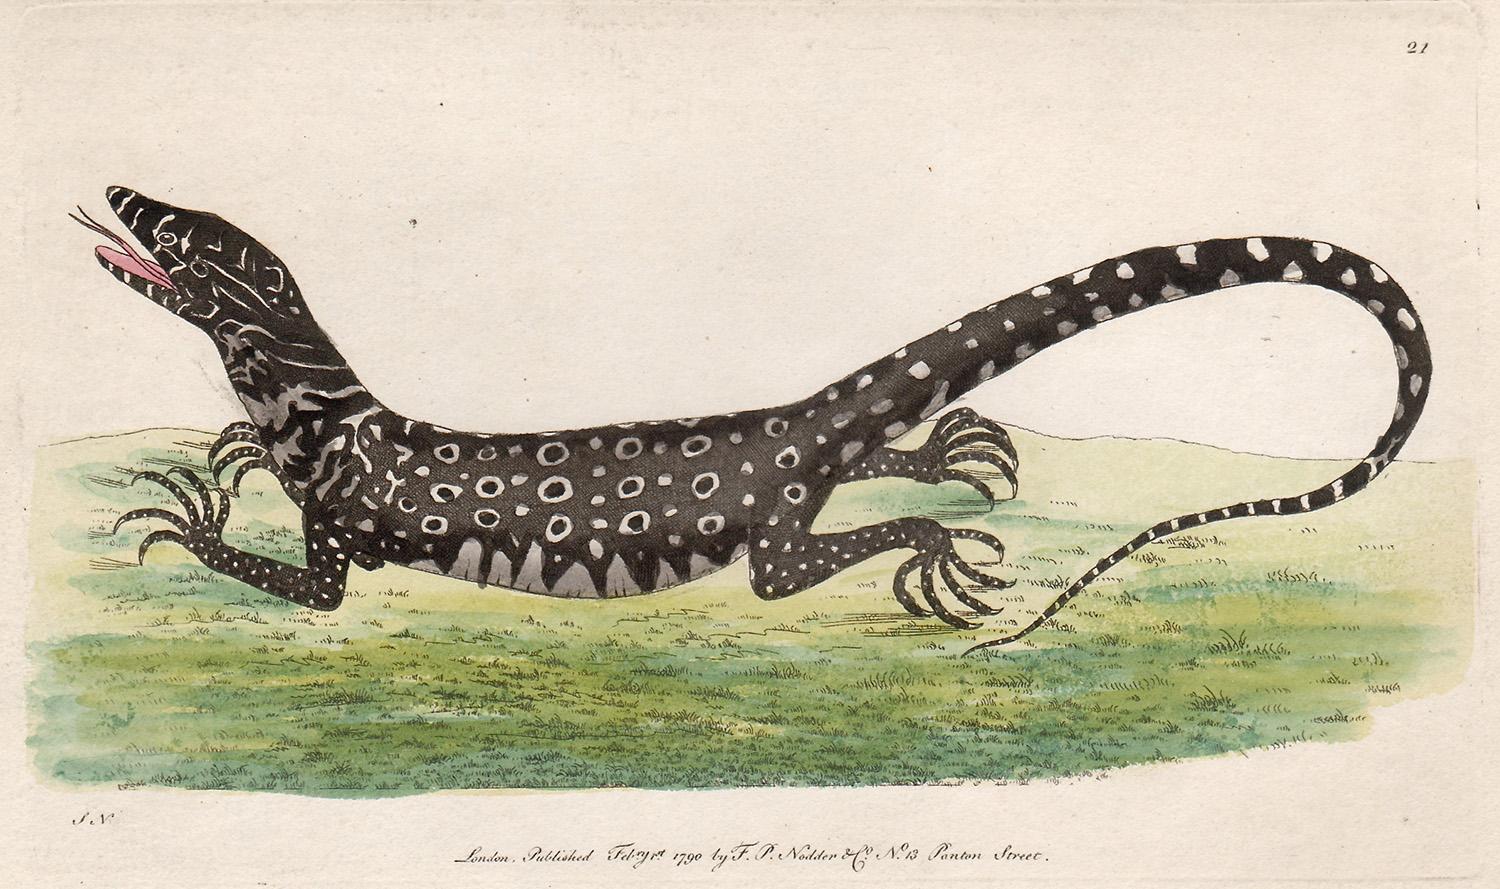 Frederick Polydore Nodder Animal Print - The Monitory Lizard, Australia, engraving with original hand-colouring, 1790